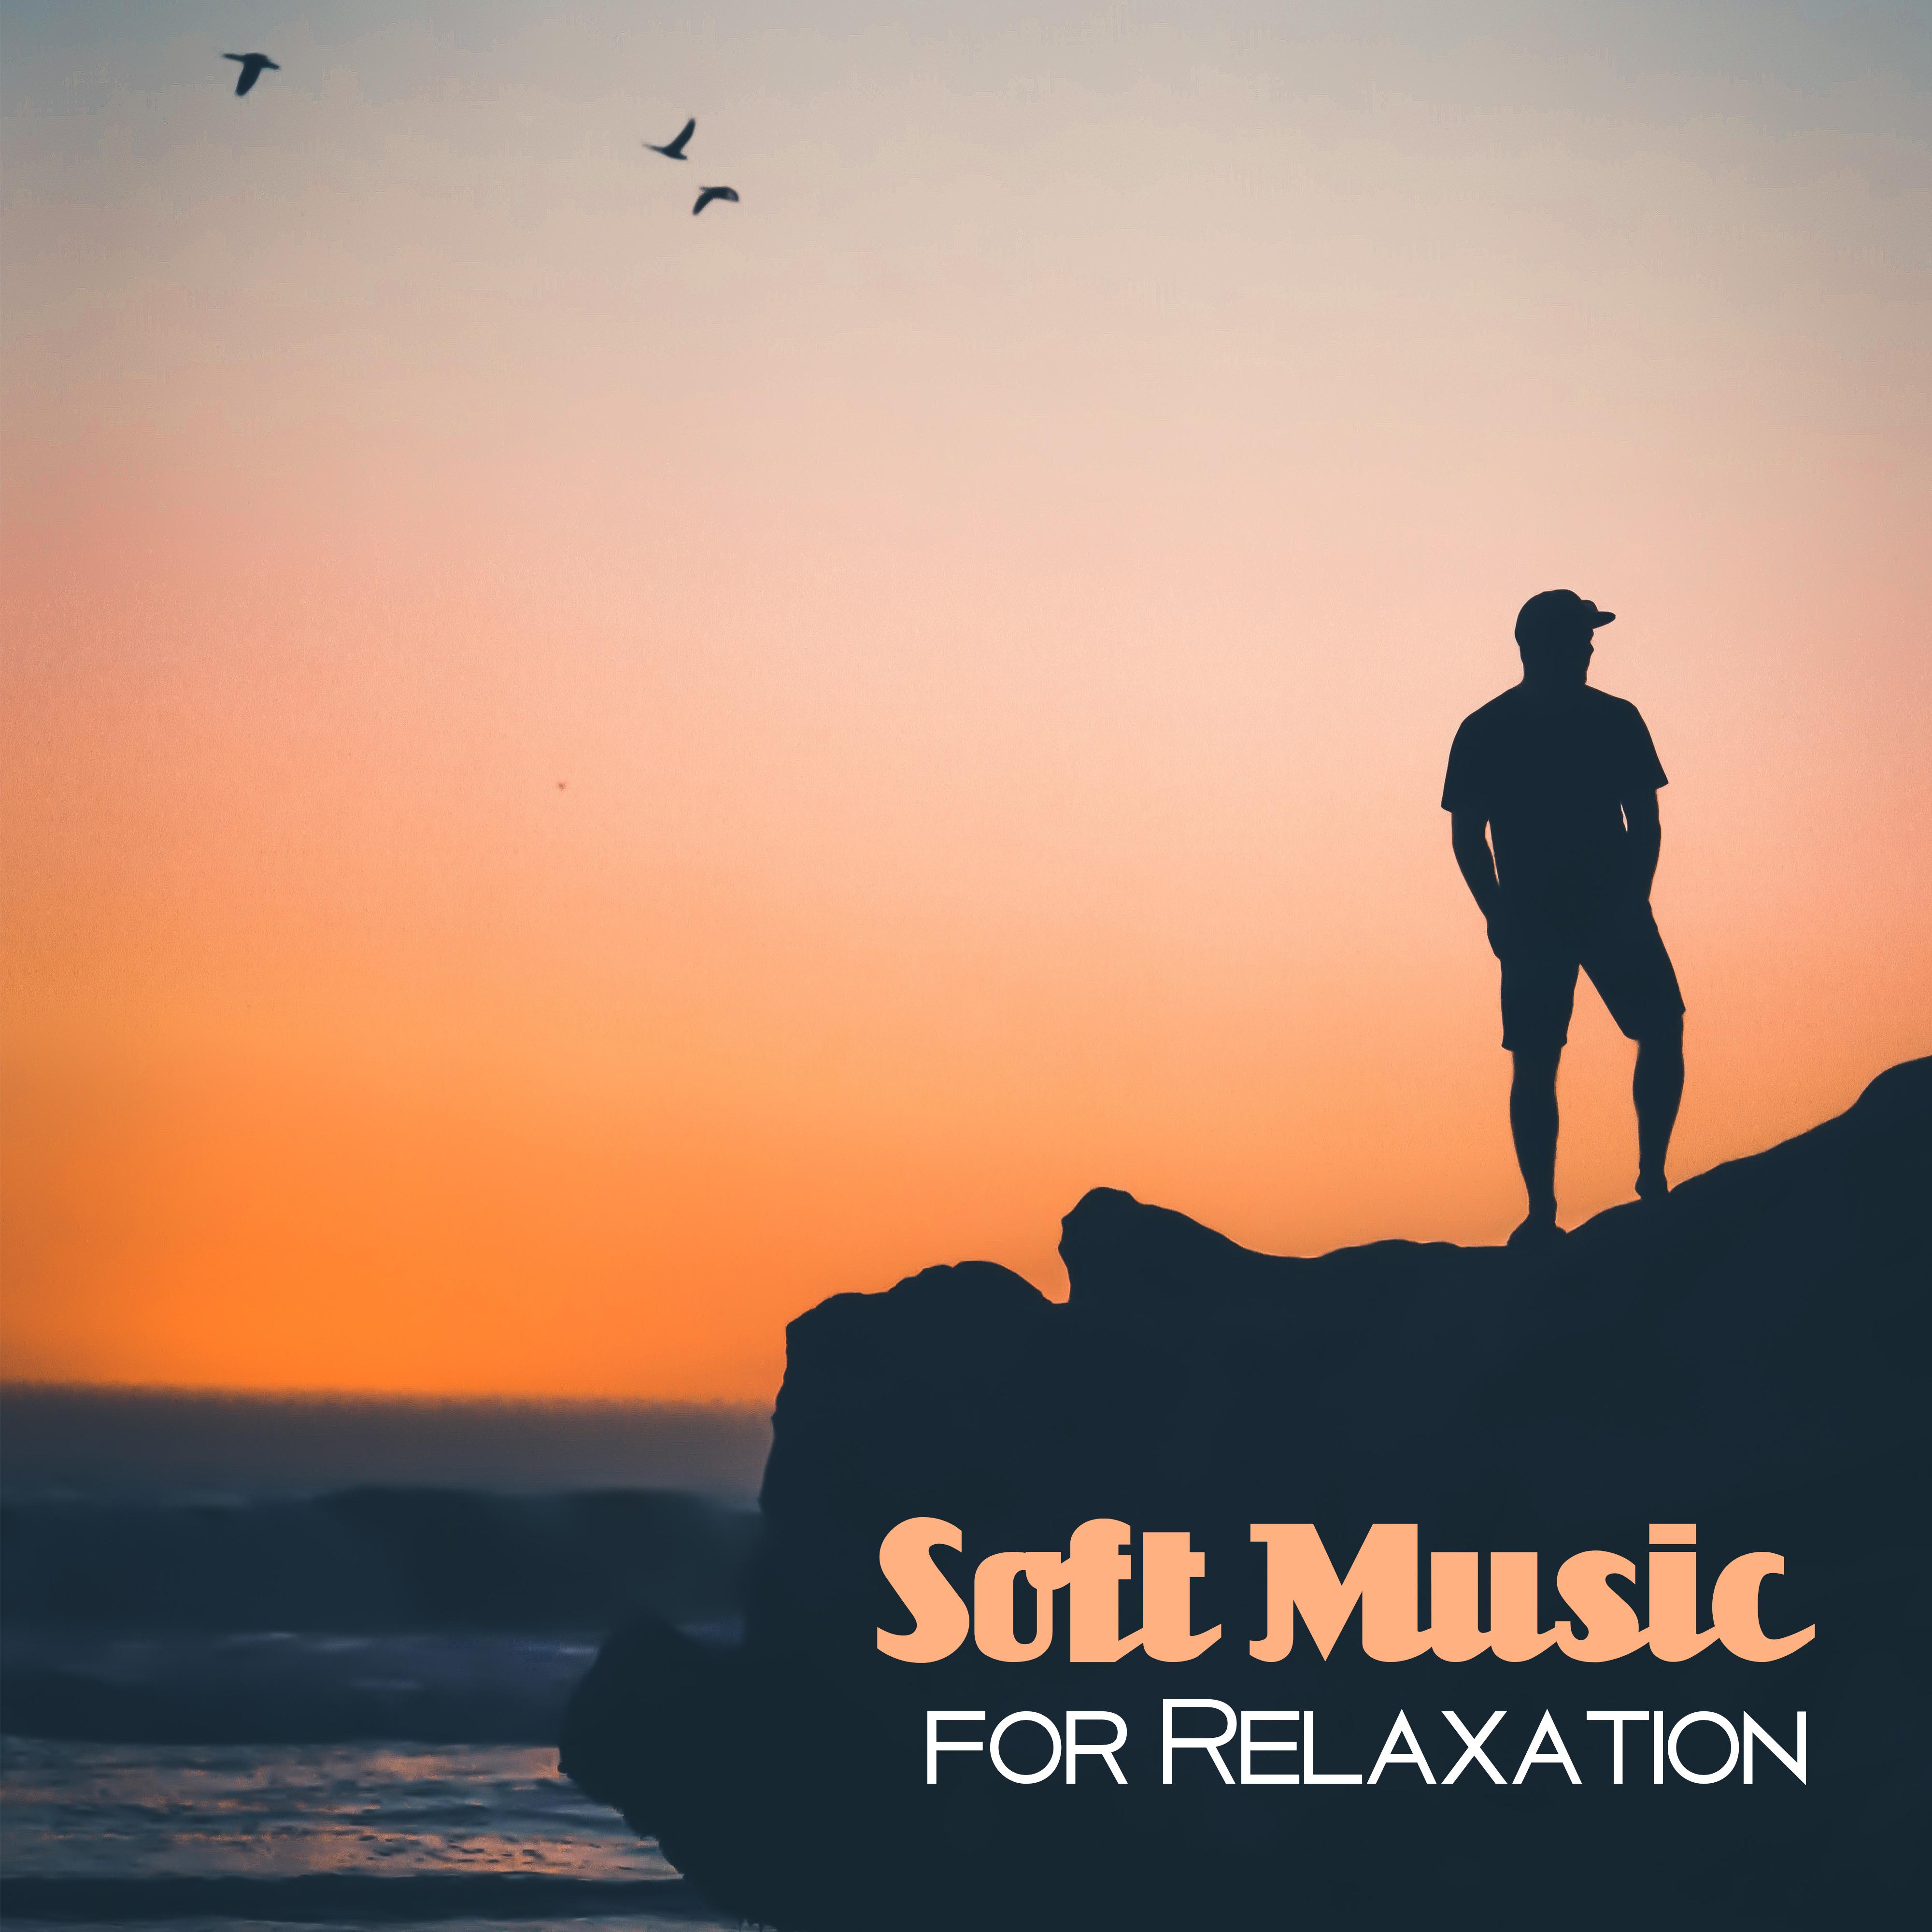 Soft Music for Relaxation  Easy Listening, Peaceful Melodies, Stress Relief, New Age Music, Healing Therapy